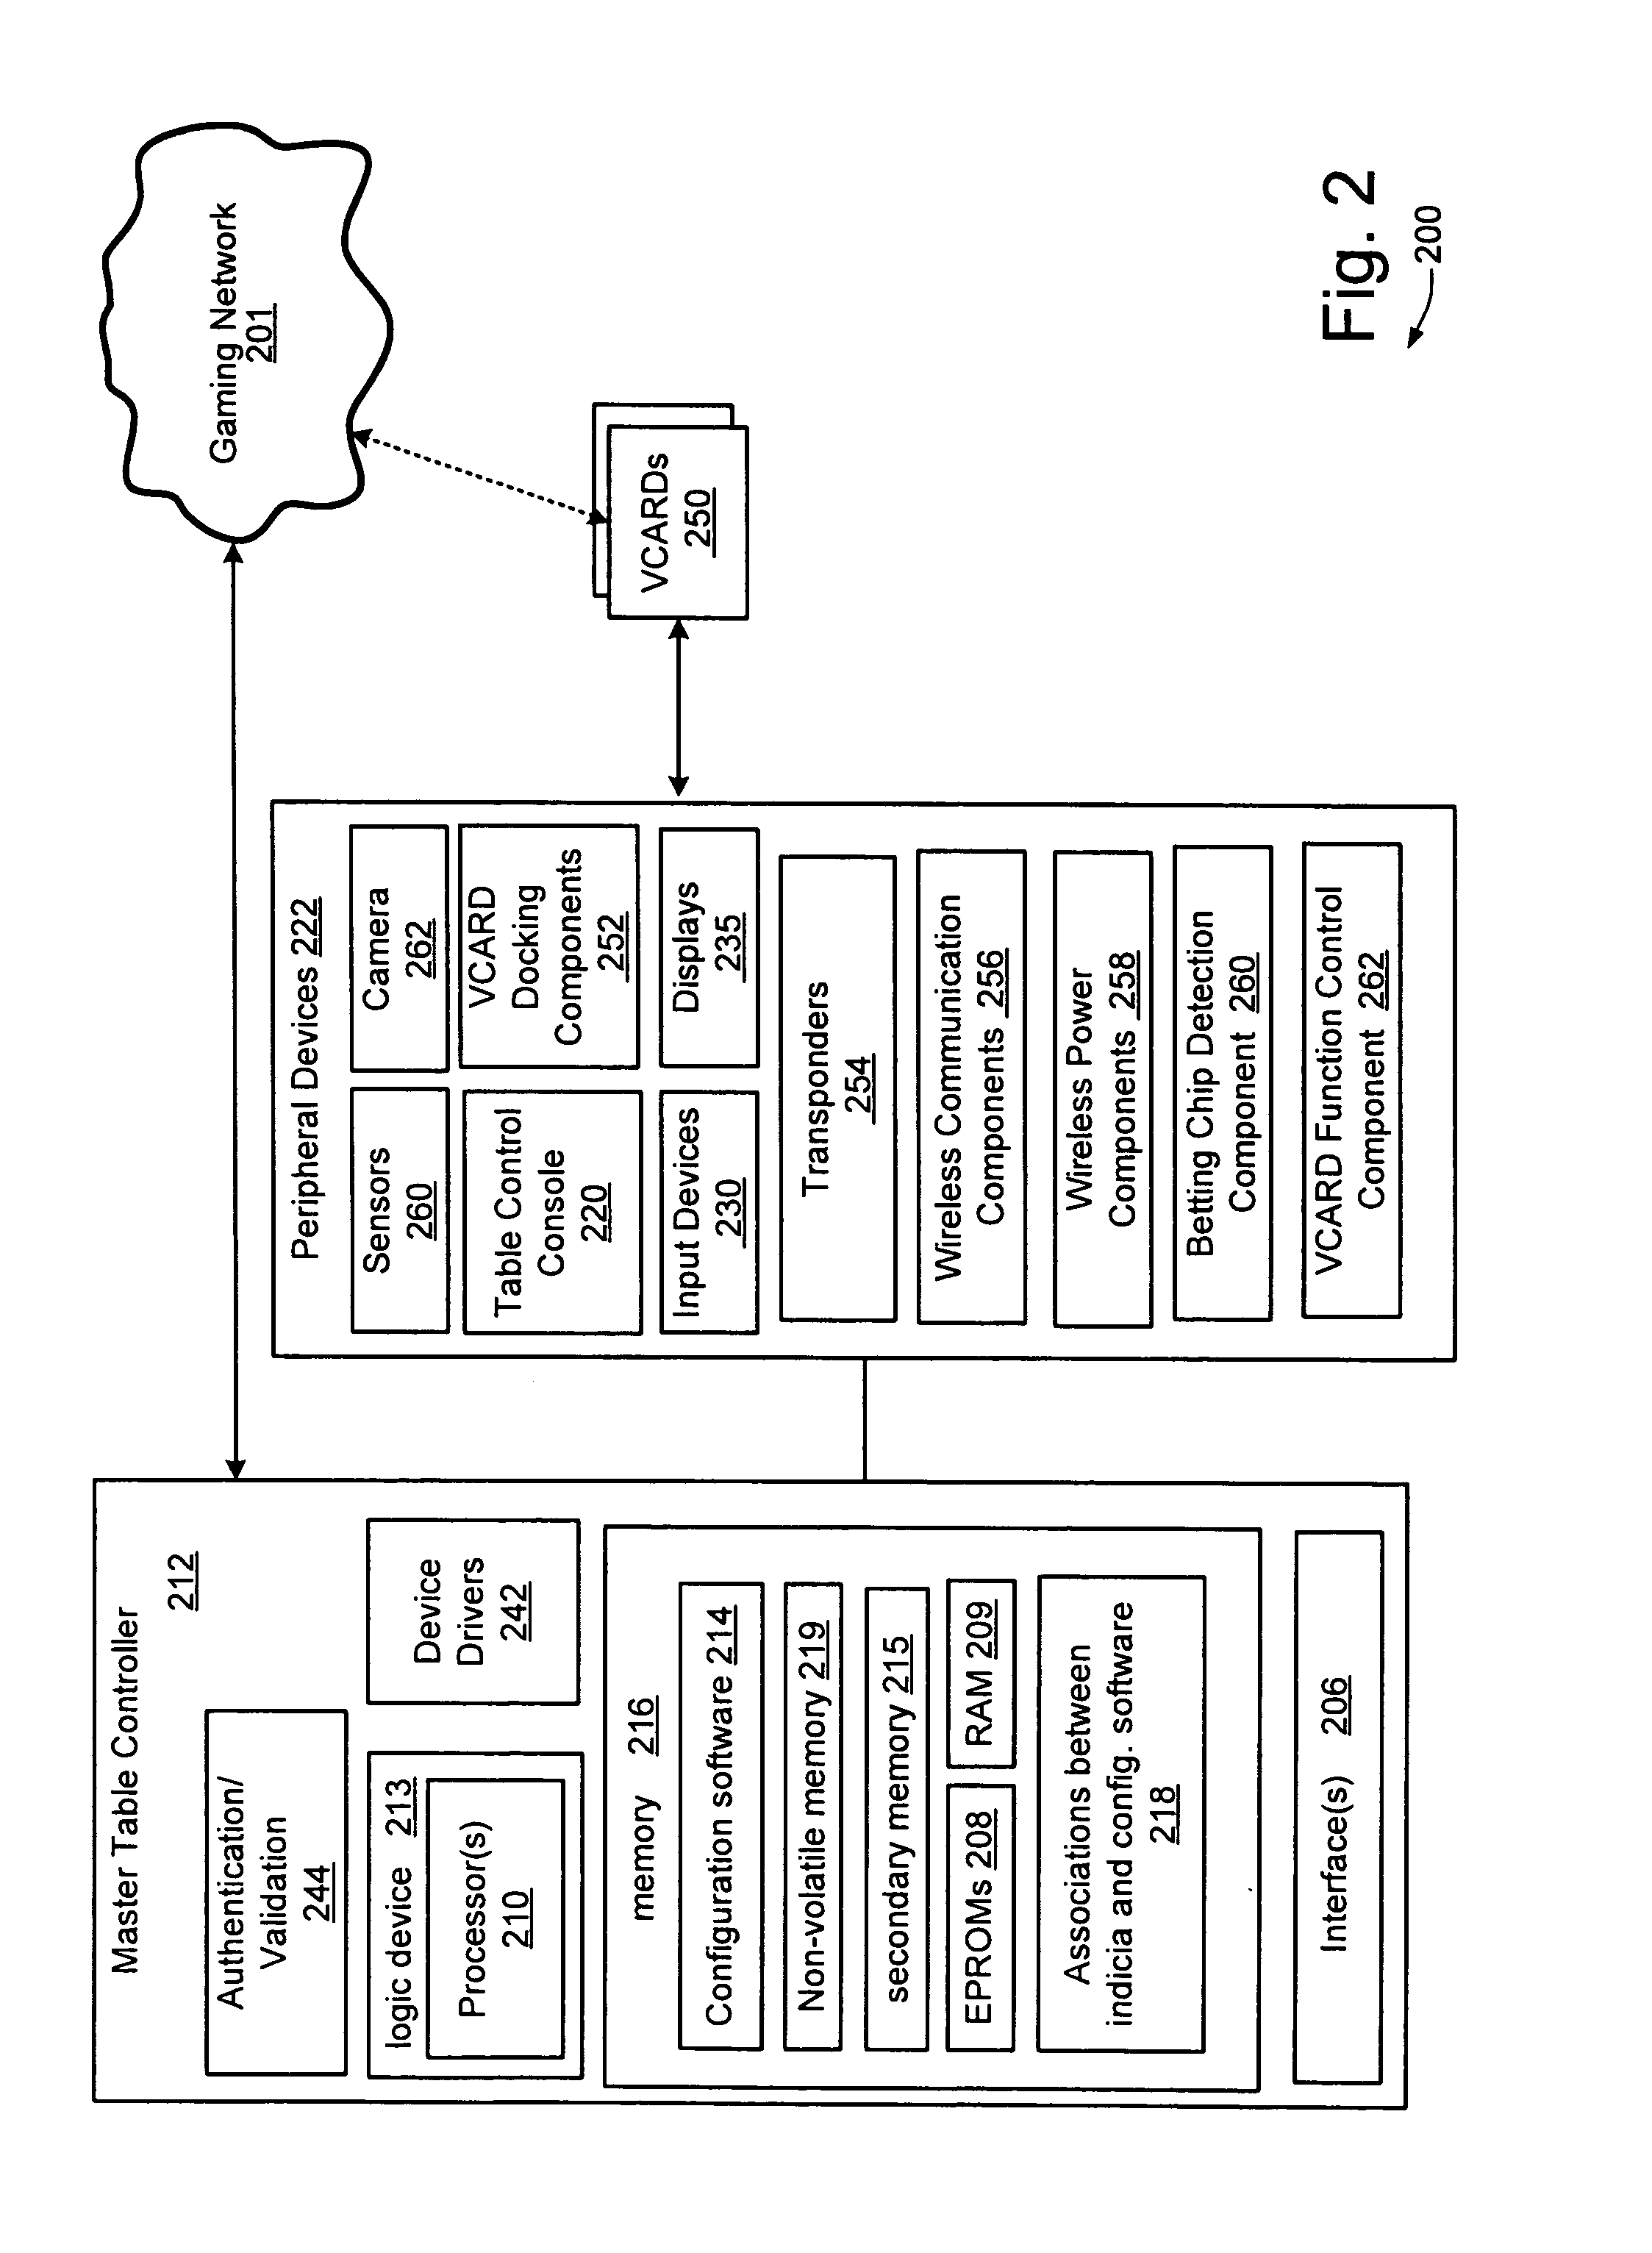 Intelligent casino gaming table and systems thereof